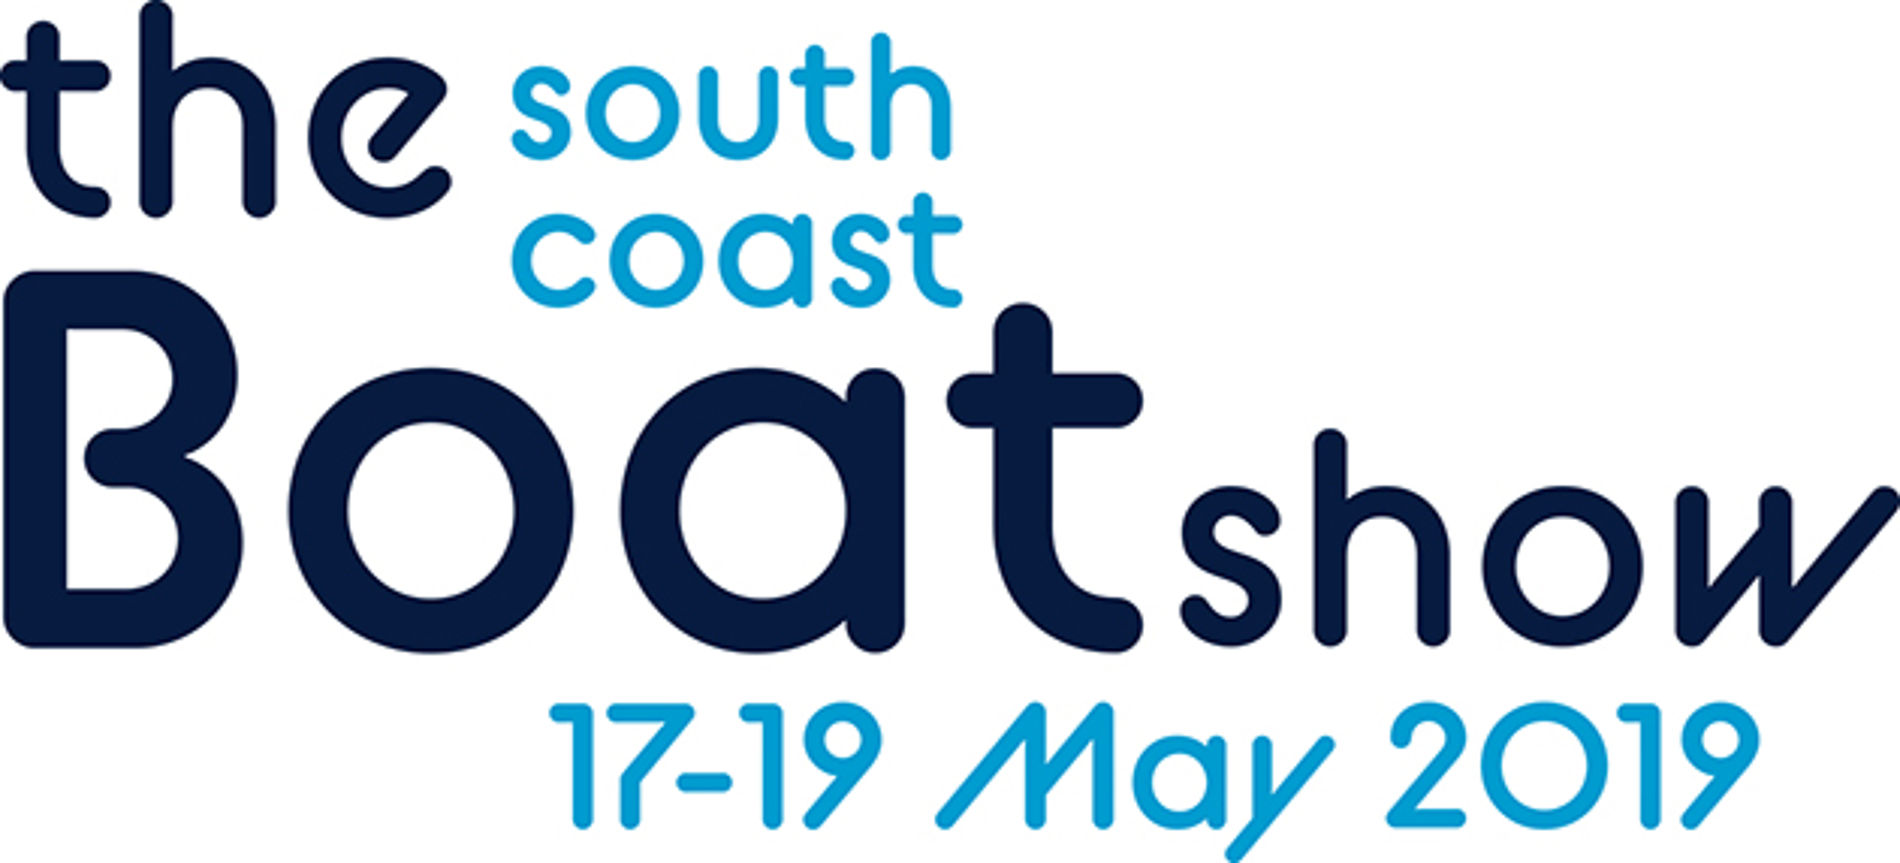 See a Hallberg-Rassy 44 at the South Coast Boat Show in Southampton, UK, 17-19 May 2019